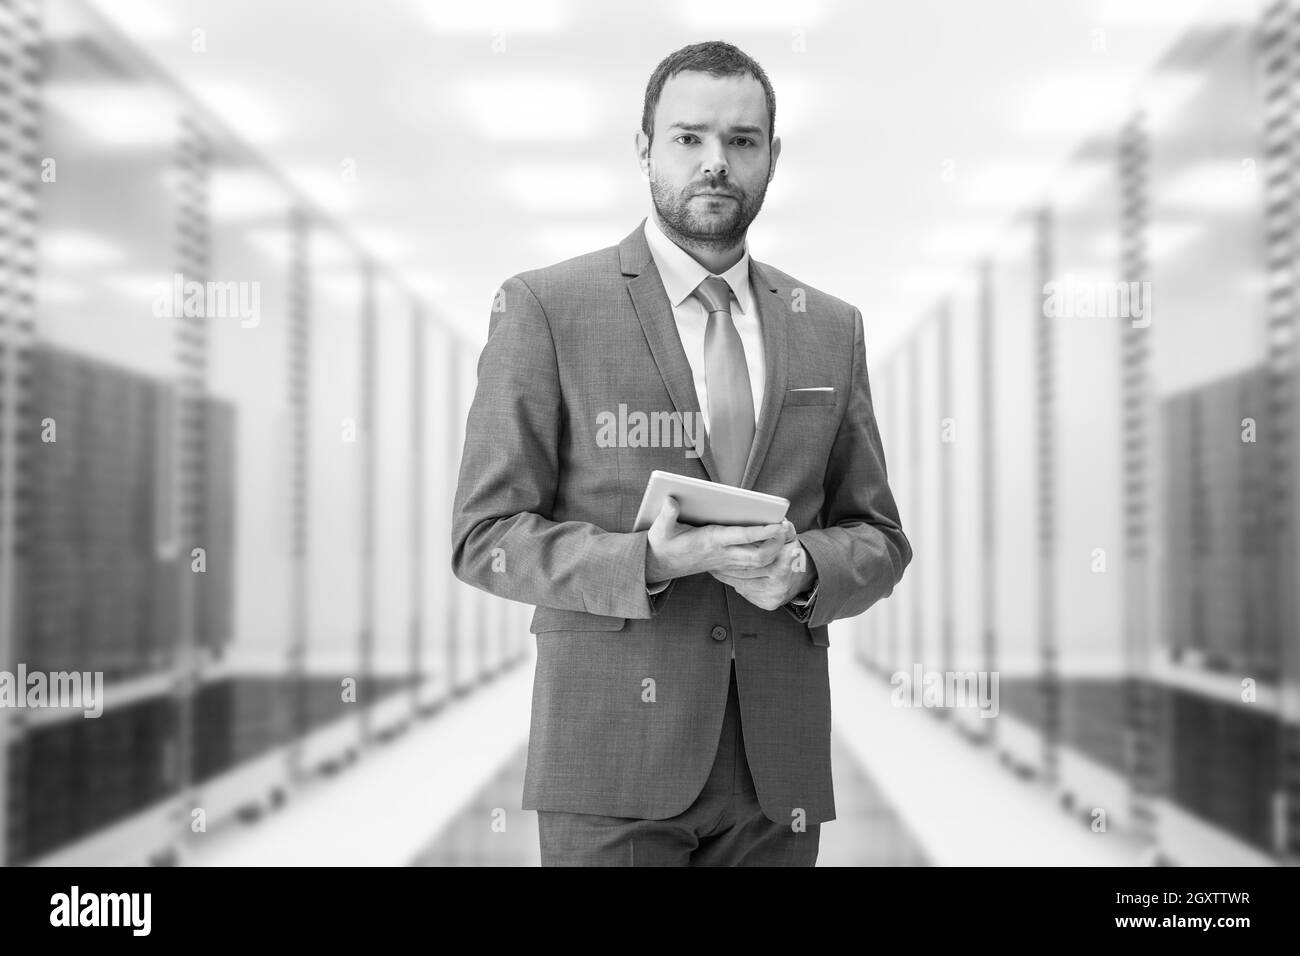 Portrait of young businessman in server room using tablet Stock Photo